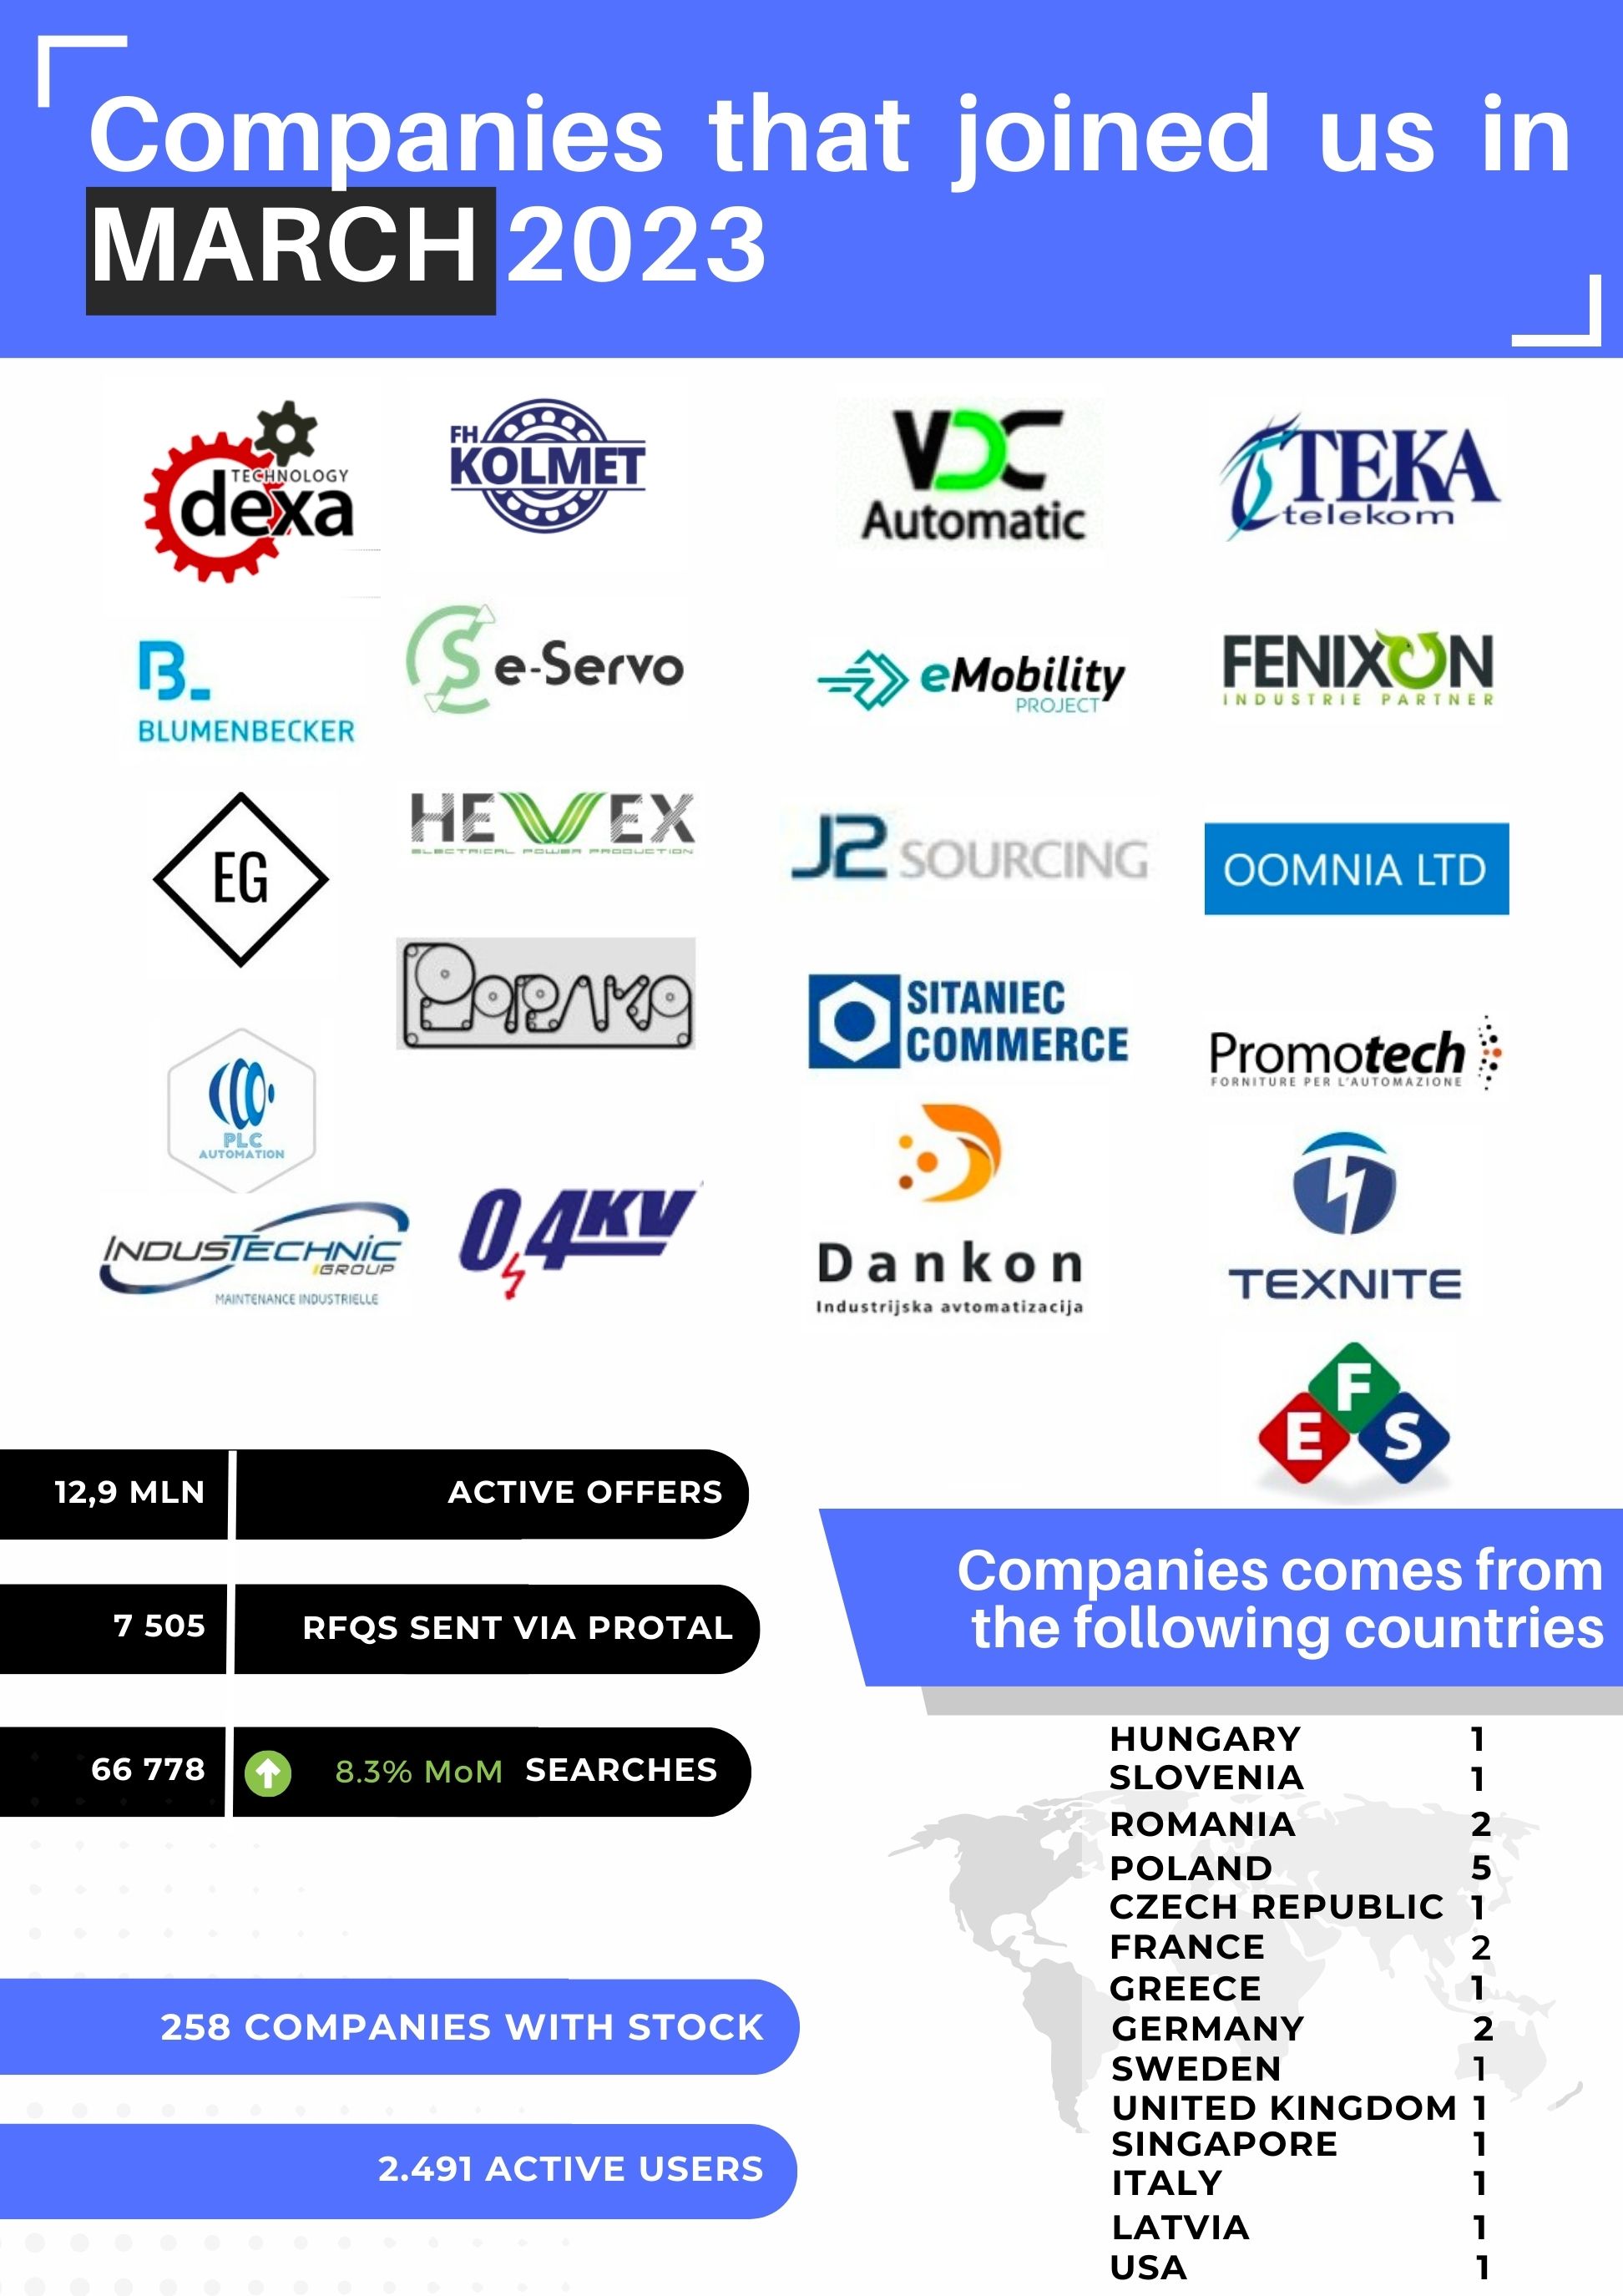 Companies that have joined Automa.Net in March